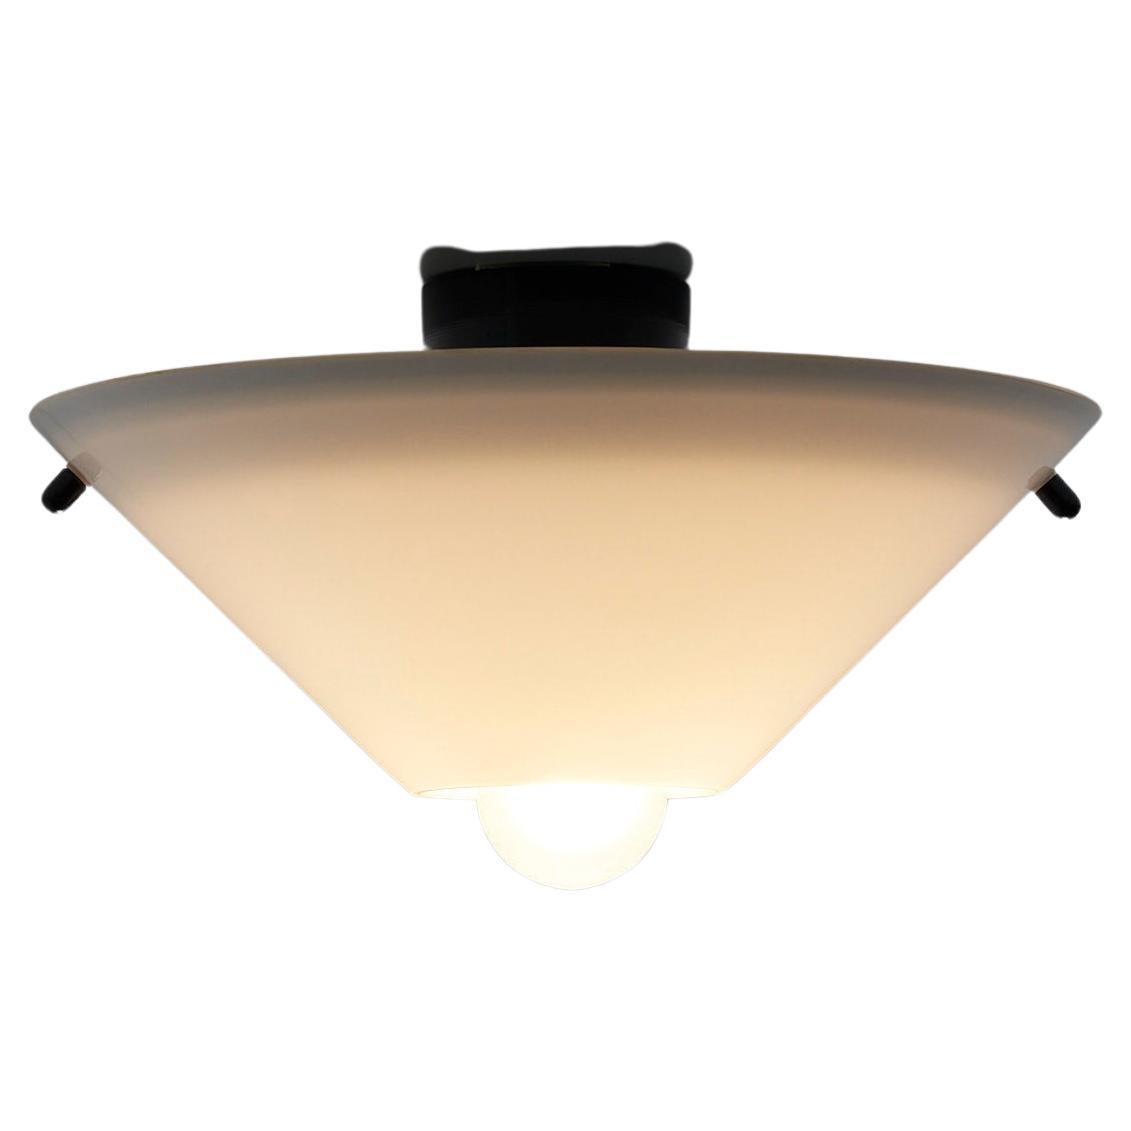 'Cono' Space Wall or Ceiling Mount, Italy Lamperti